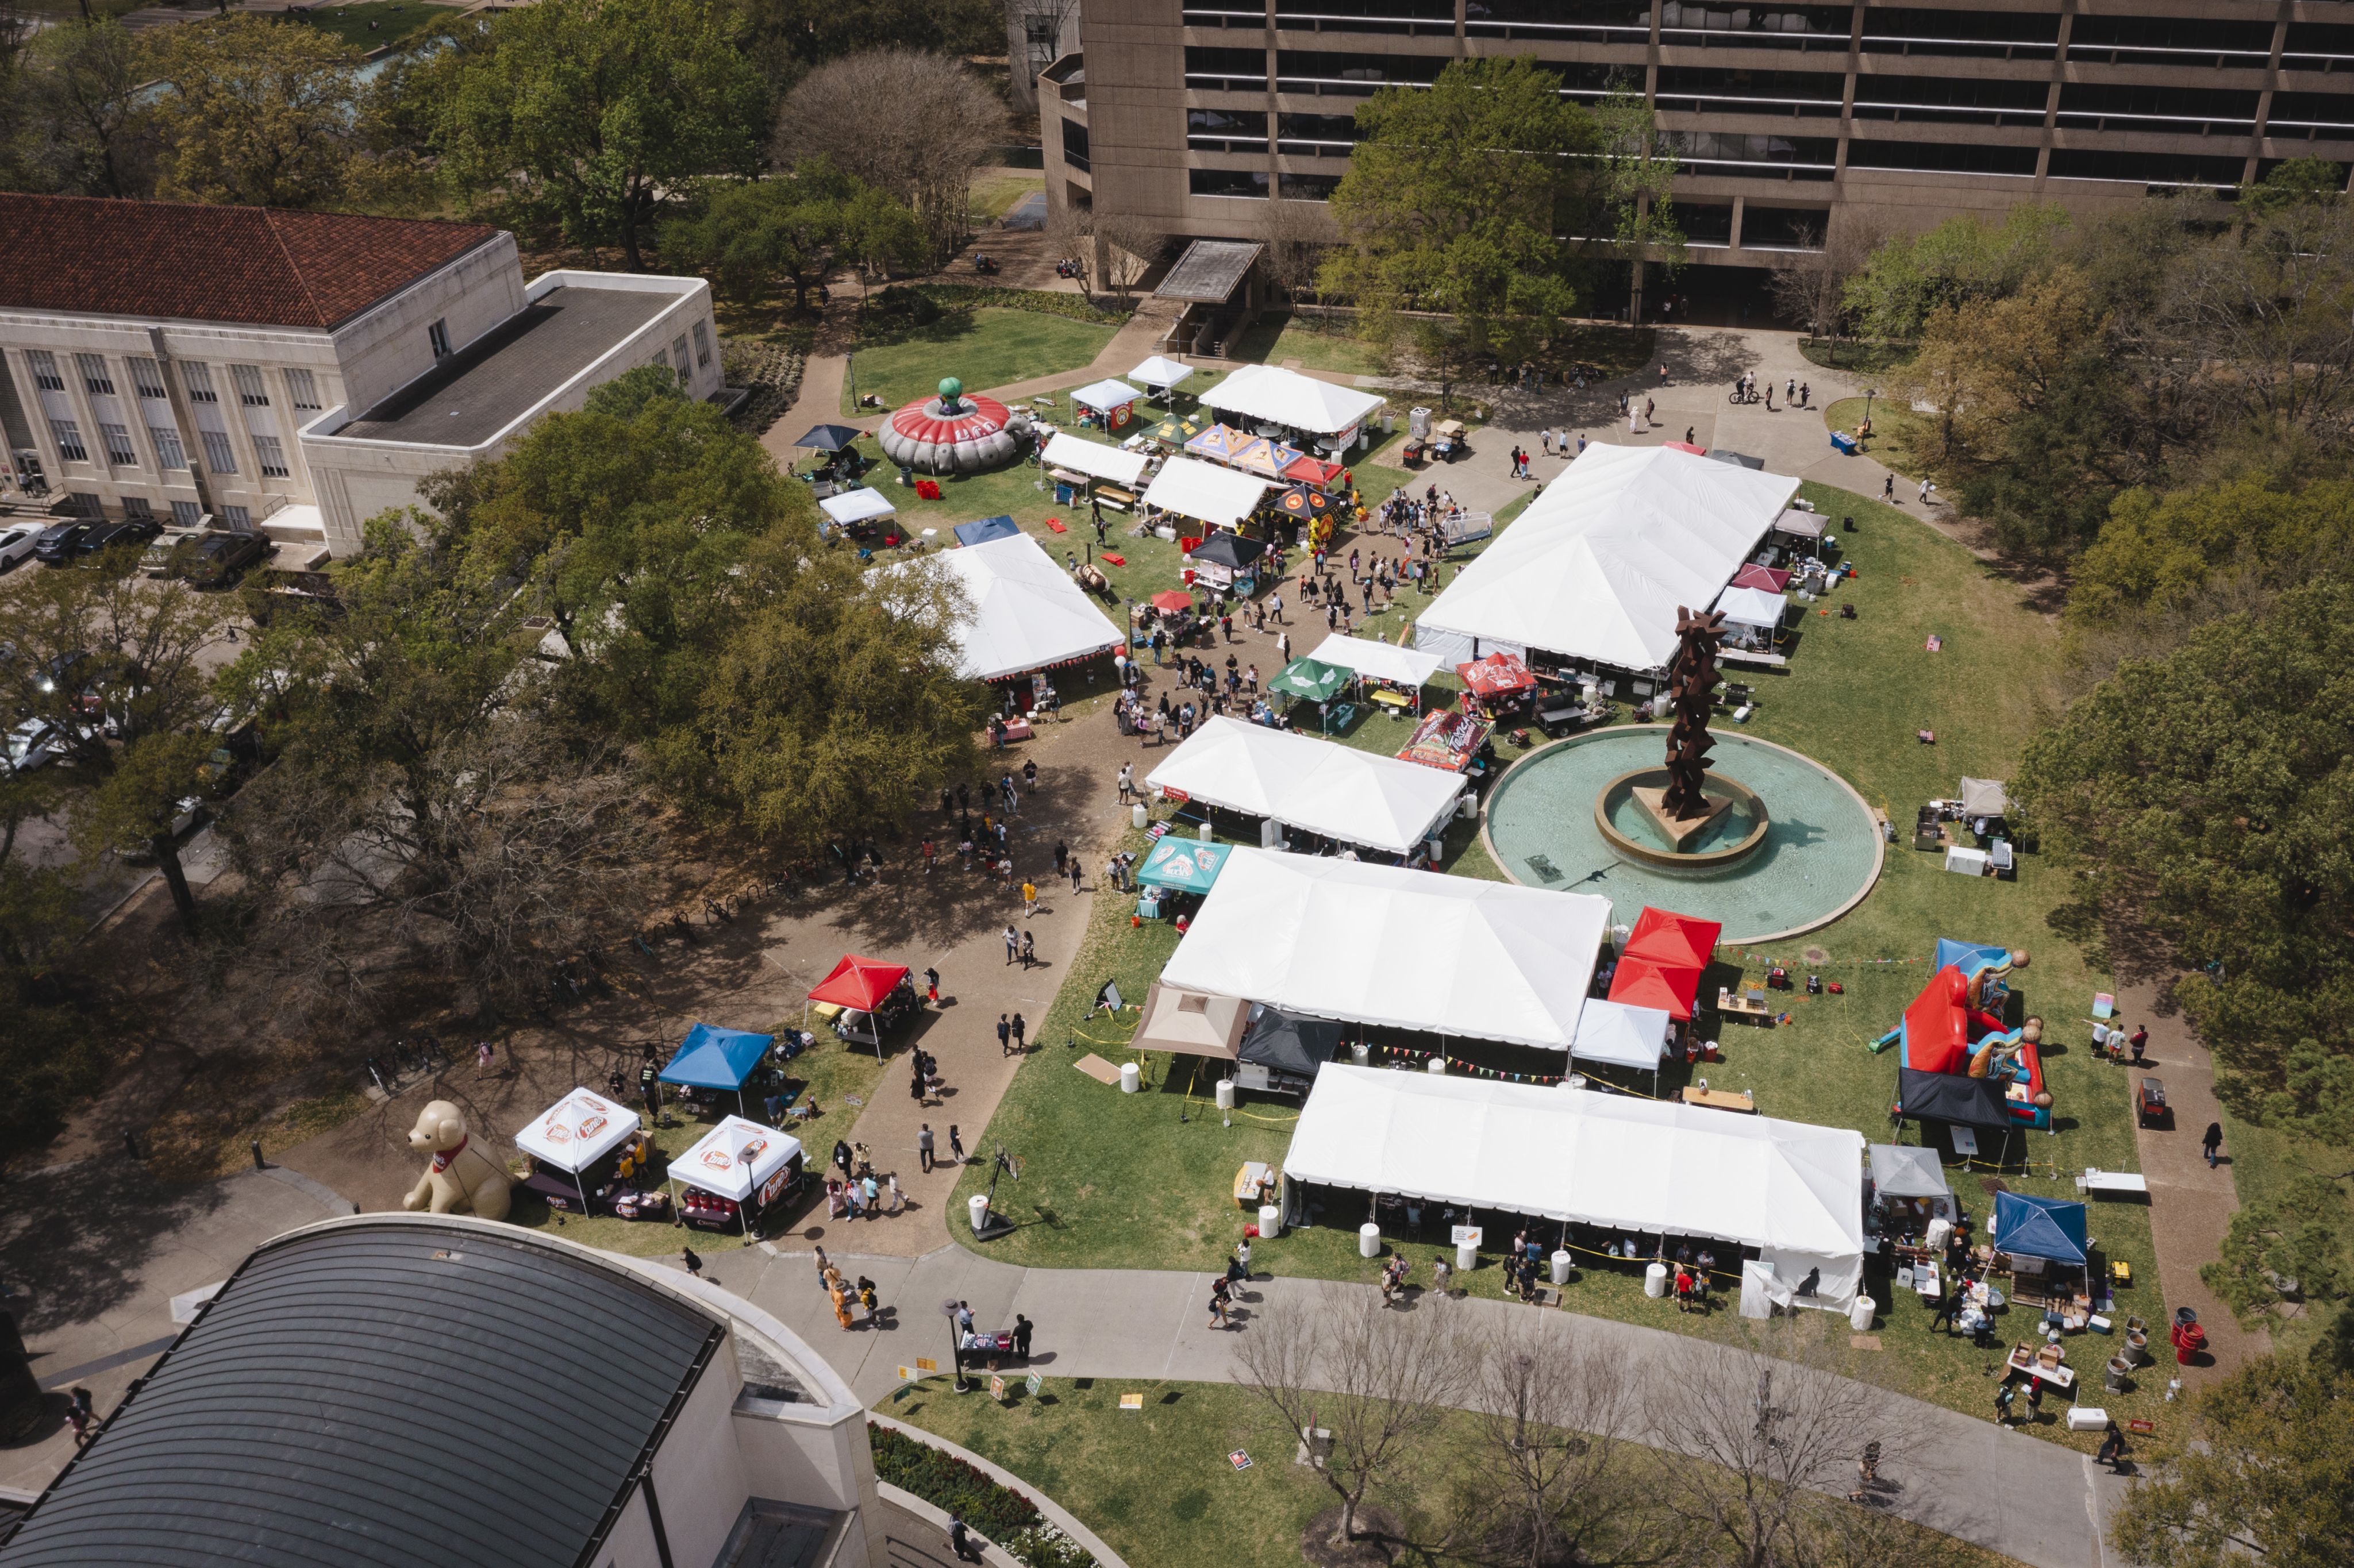 Aerial photo of UH's Butler Plaza with food tents